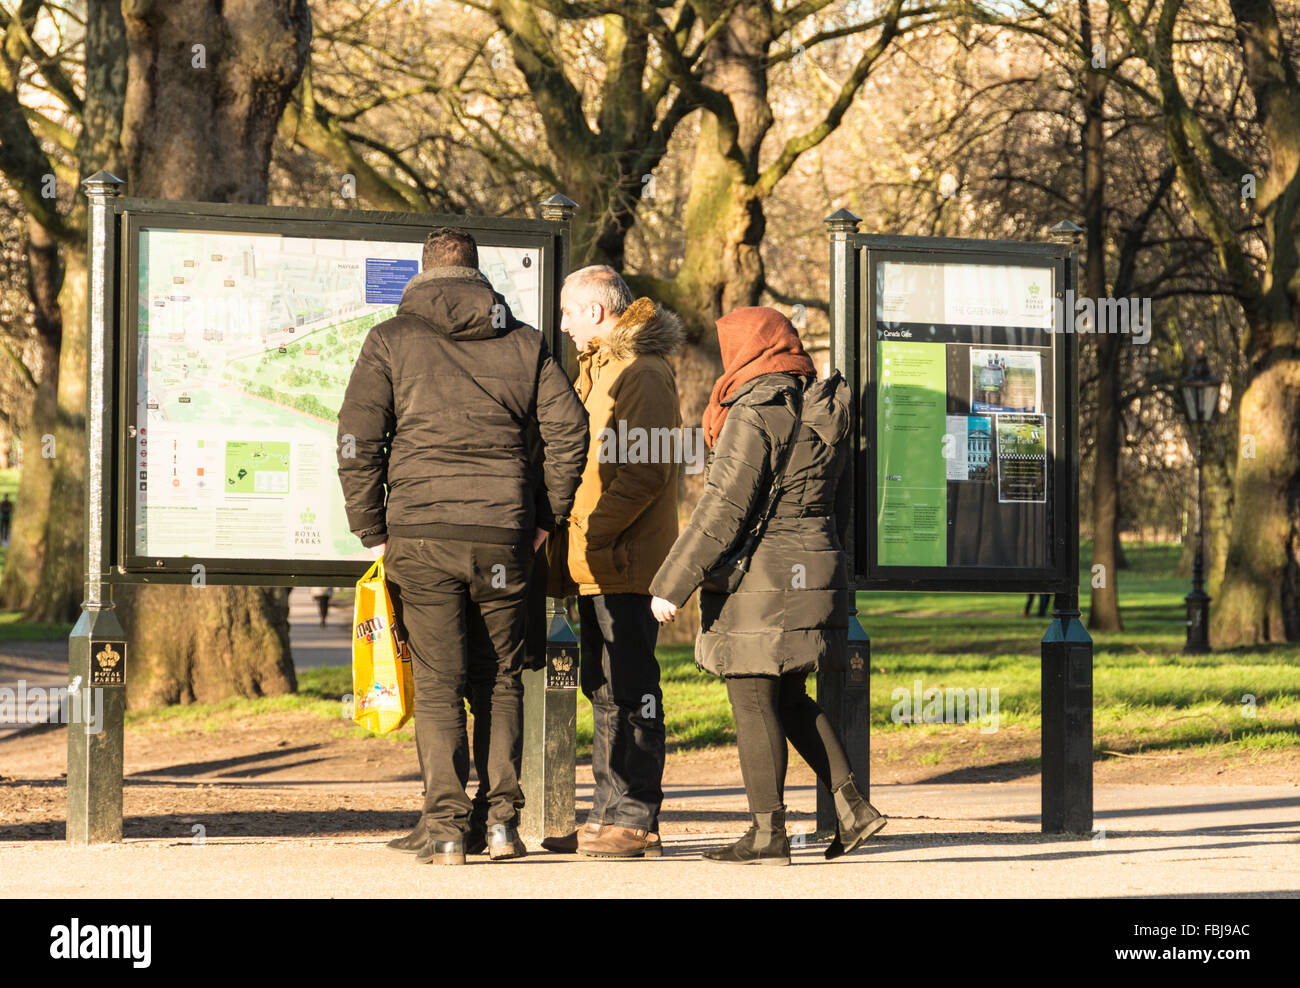 A group of tourists in London looking at a noticeboard in St. Jame's Park Stock Photo